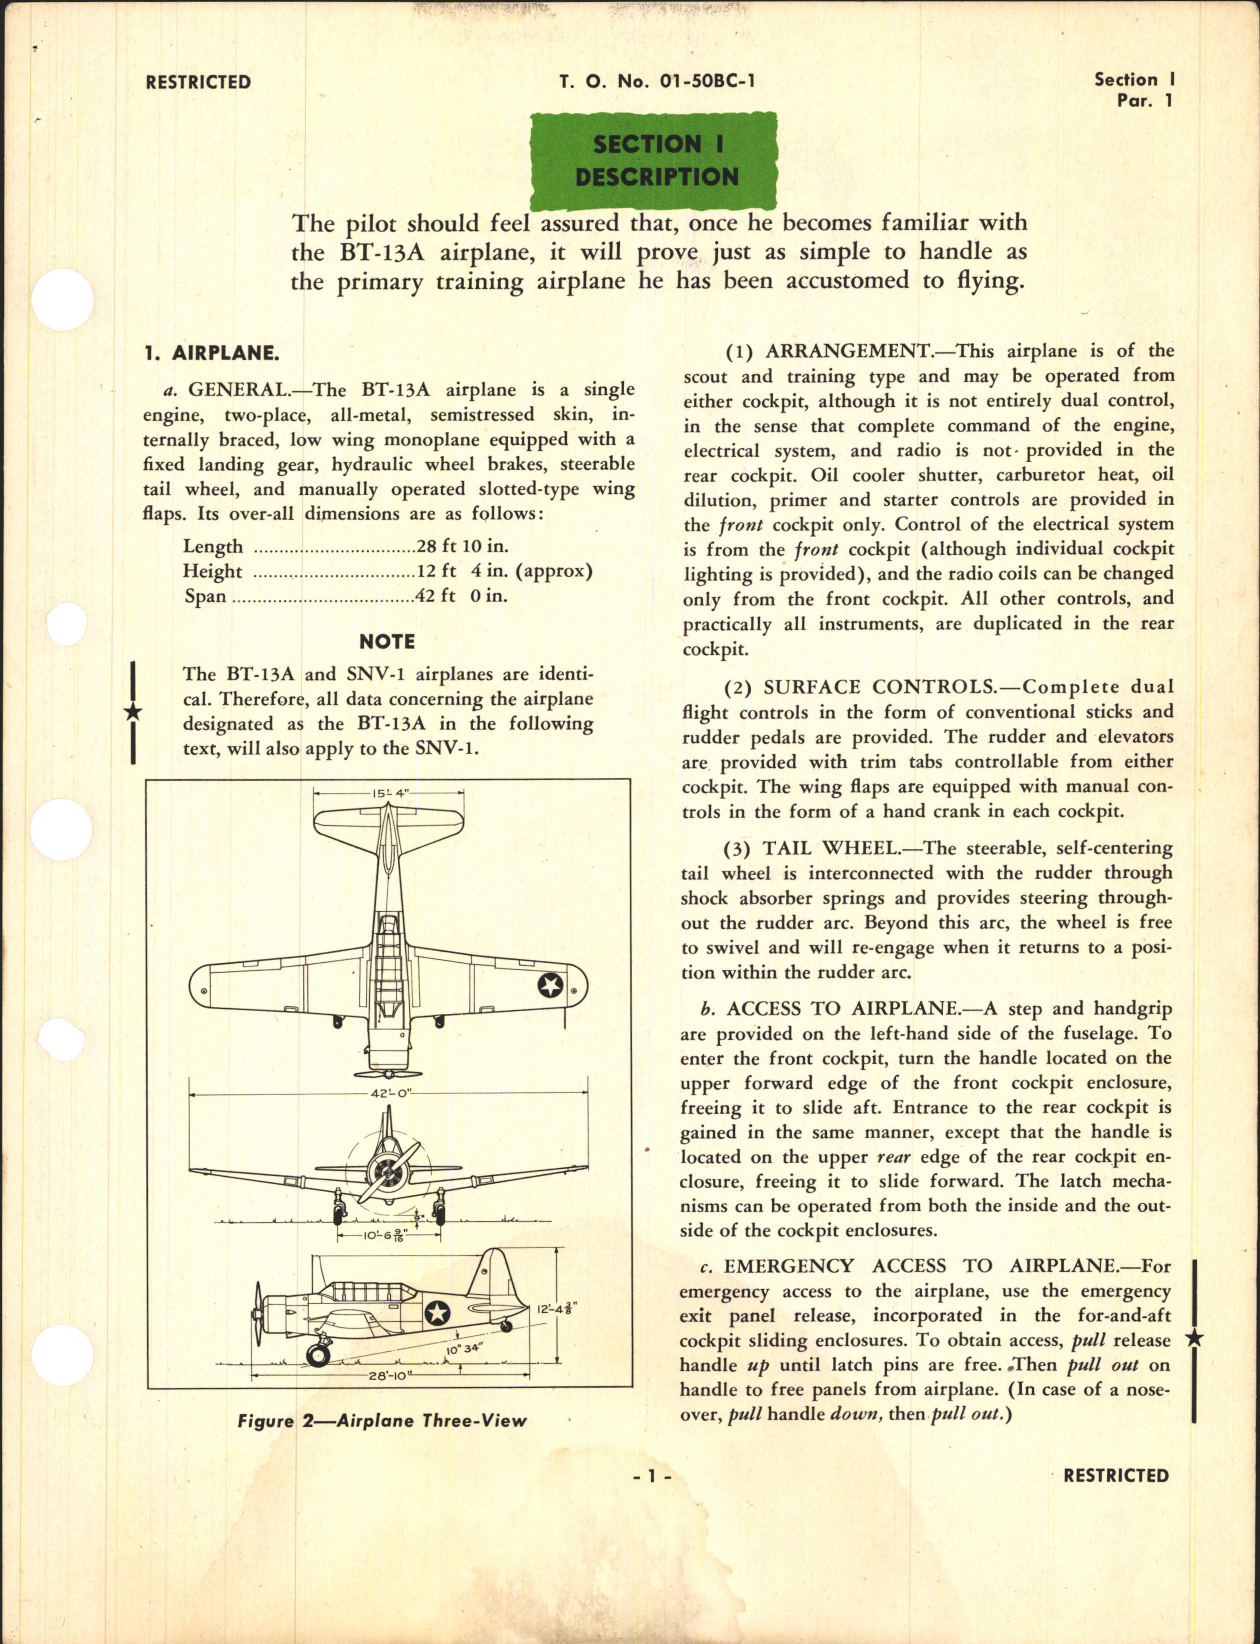 Sample page 7 from AirCorps Library document: Pilot's Flight Operating Instructions for BT-13A and SNV-1